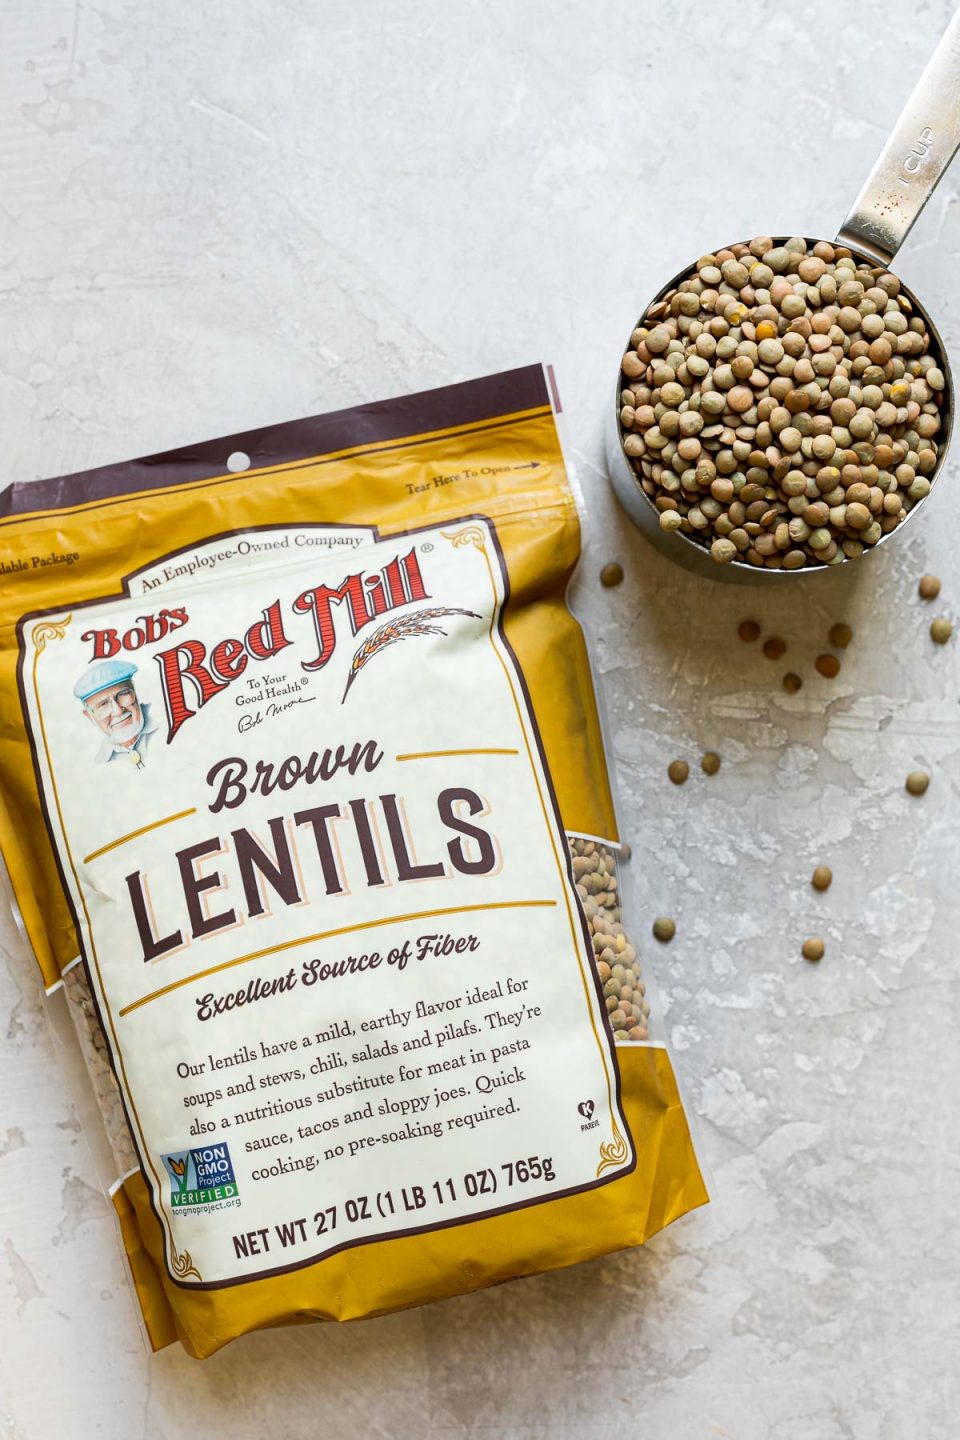 A single package of Bob's Red Mill Brown Lentils lays flat on a white cement surface. A 1 cup dry measuring cup filled with dry brown lentils sits alongside the package and the surface has a sprinkling of dry brown lentils scattered between the package & the measuring cup.